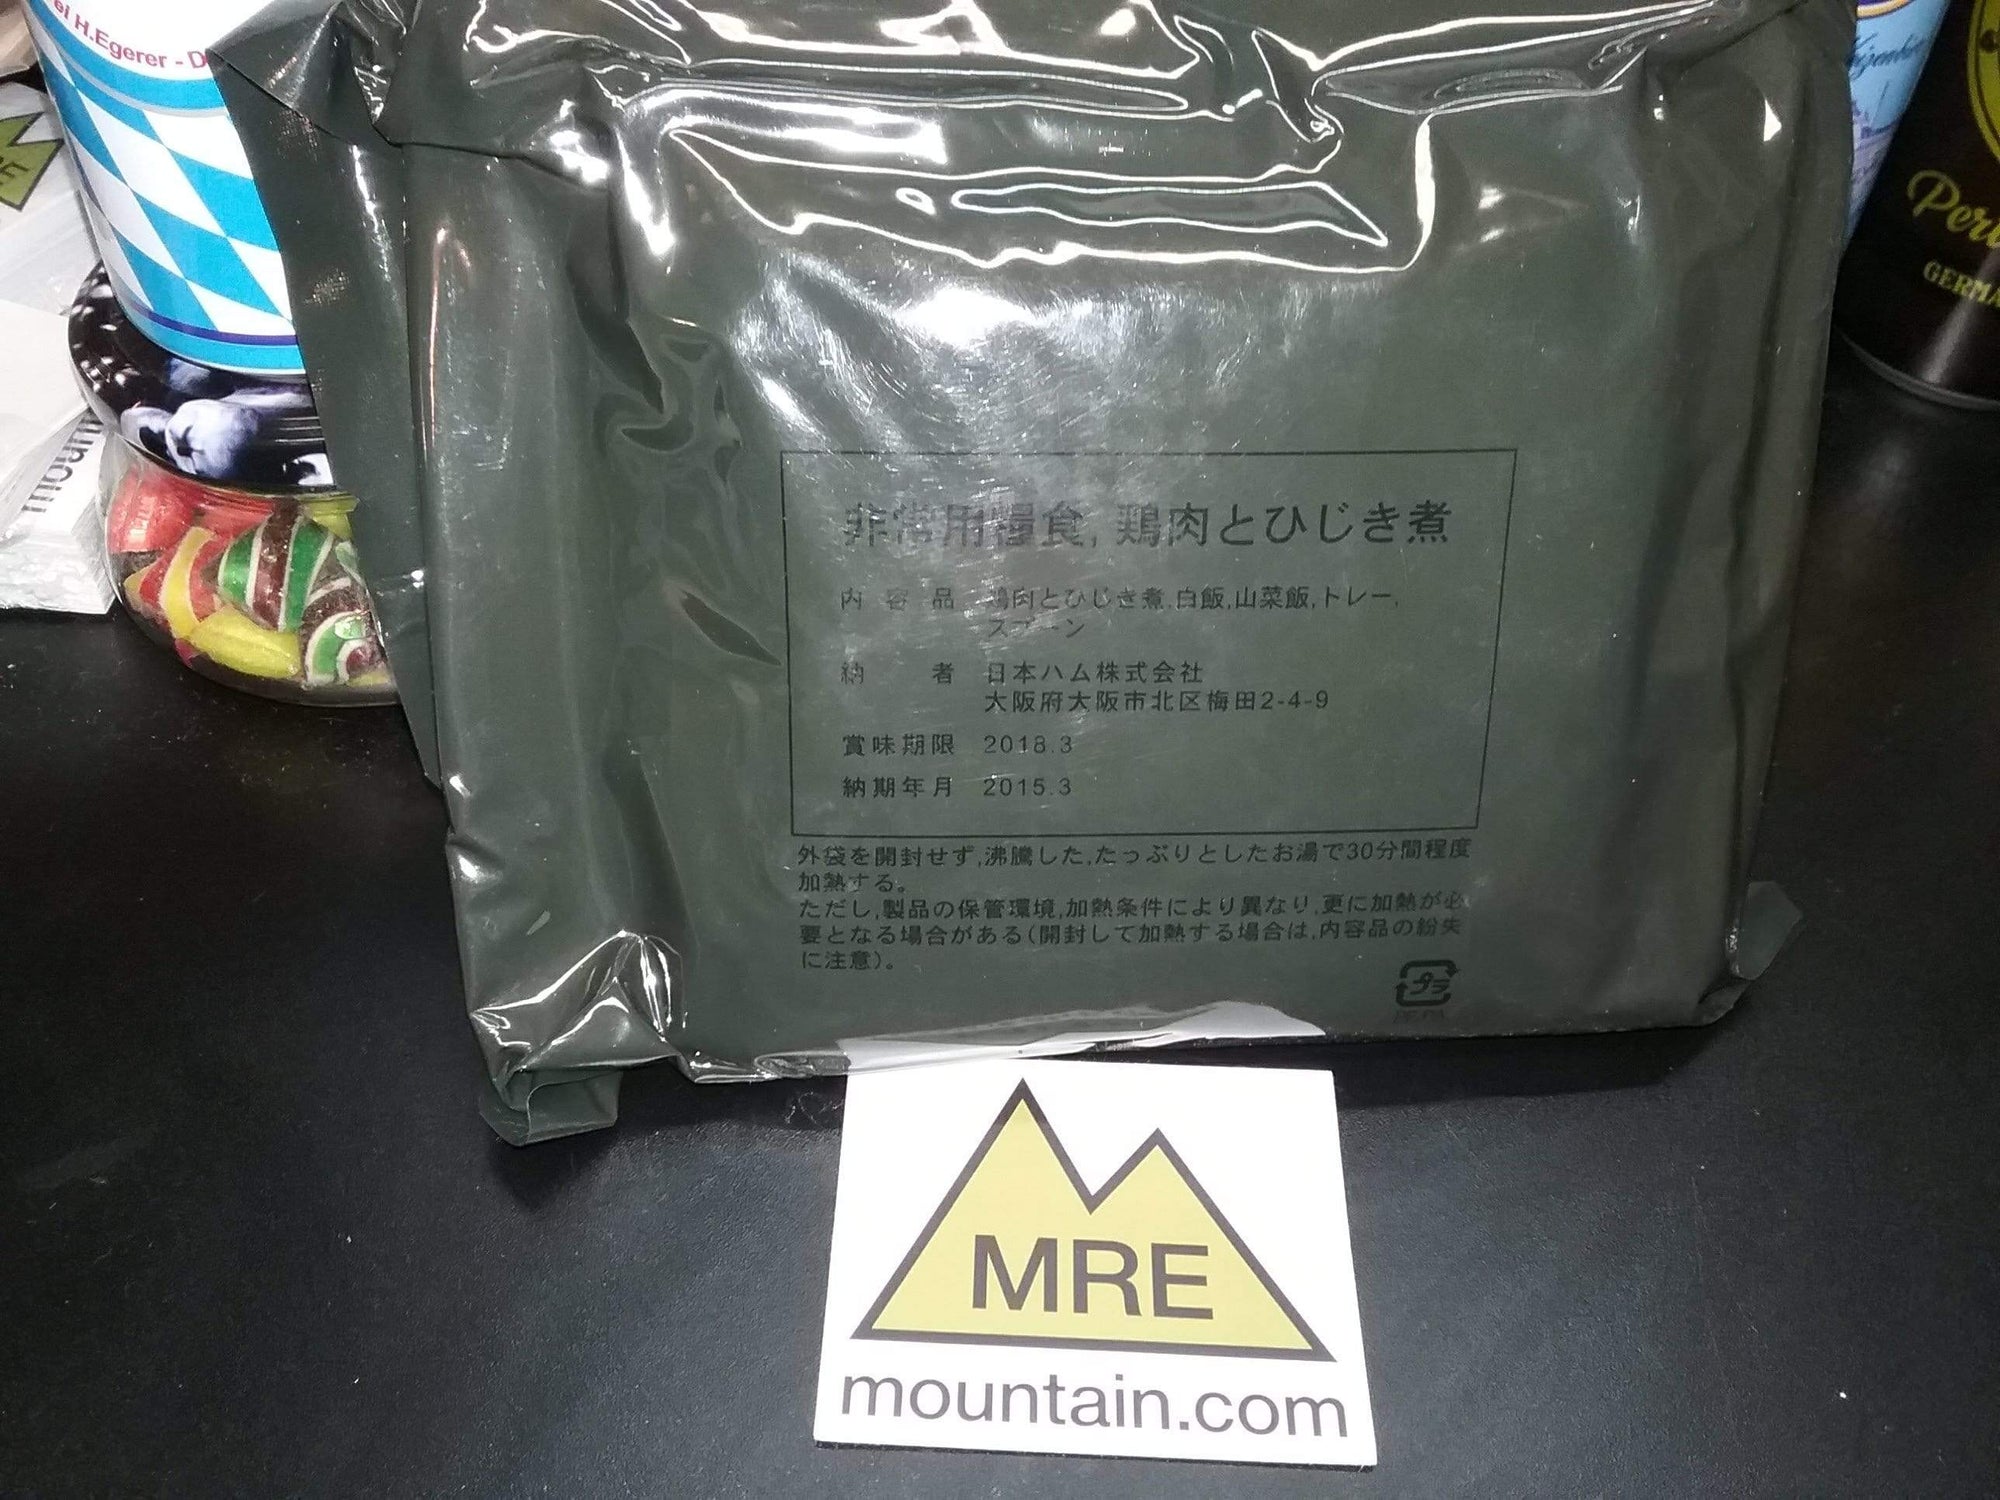 Japan Self Defense Forces JDSF Type 1 Type 2 MRE | Foreign and ...